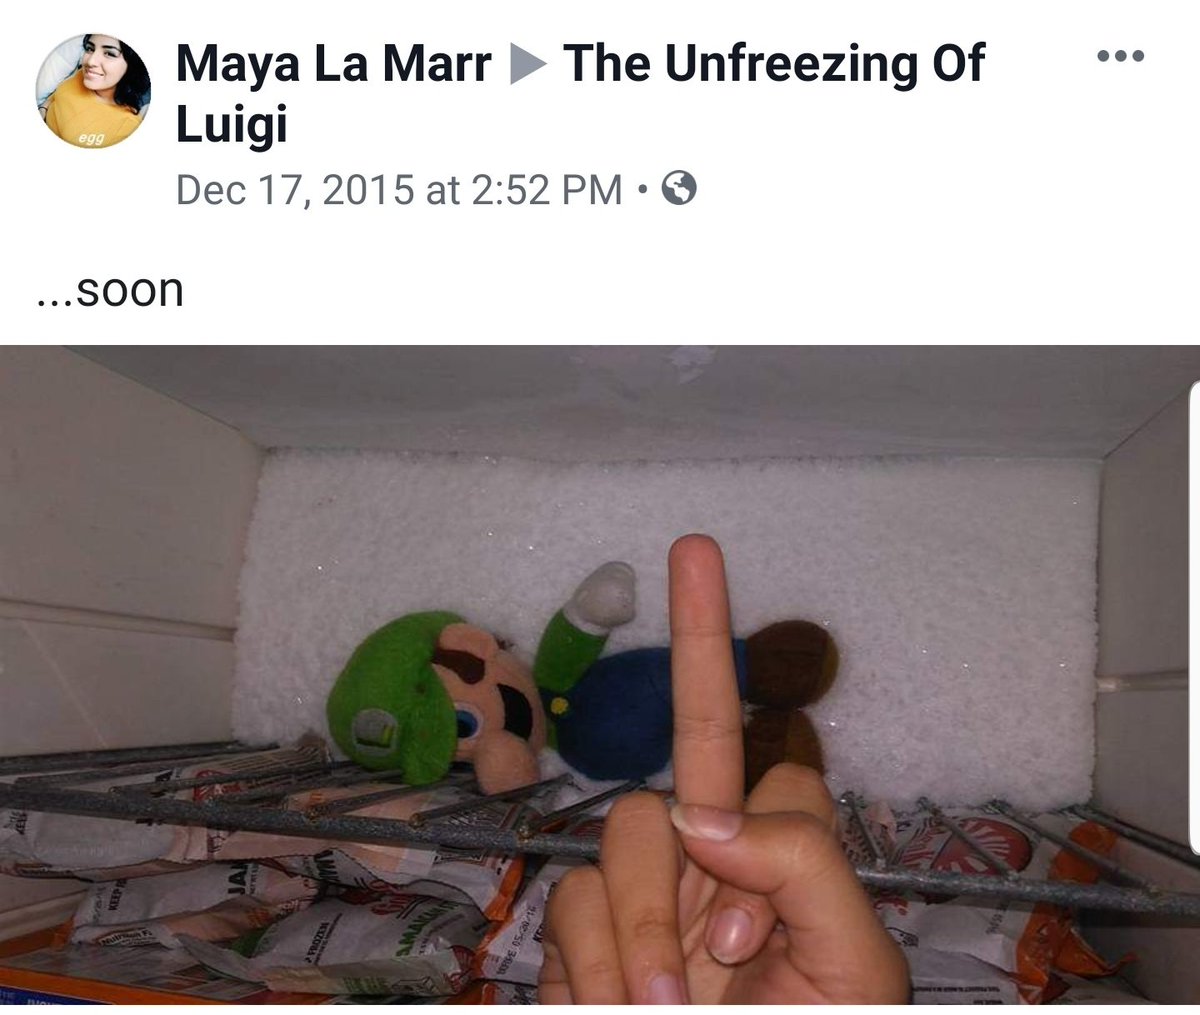 We also made a public event on FB, added my entire friend list, and posted the shenanigans as it progressed. You know, just in case we actually got possessed or killed by Luigi boi.